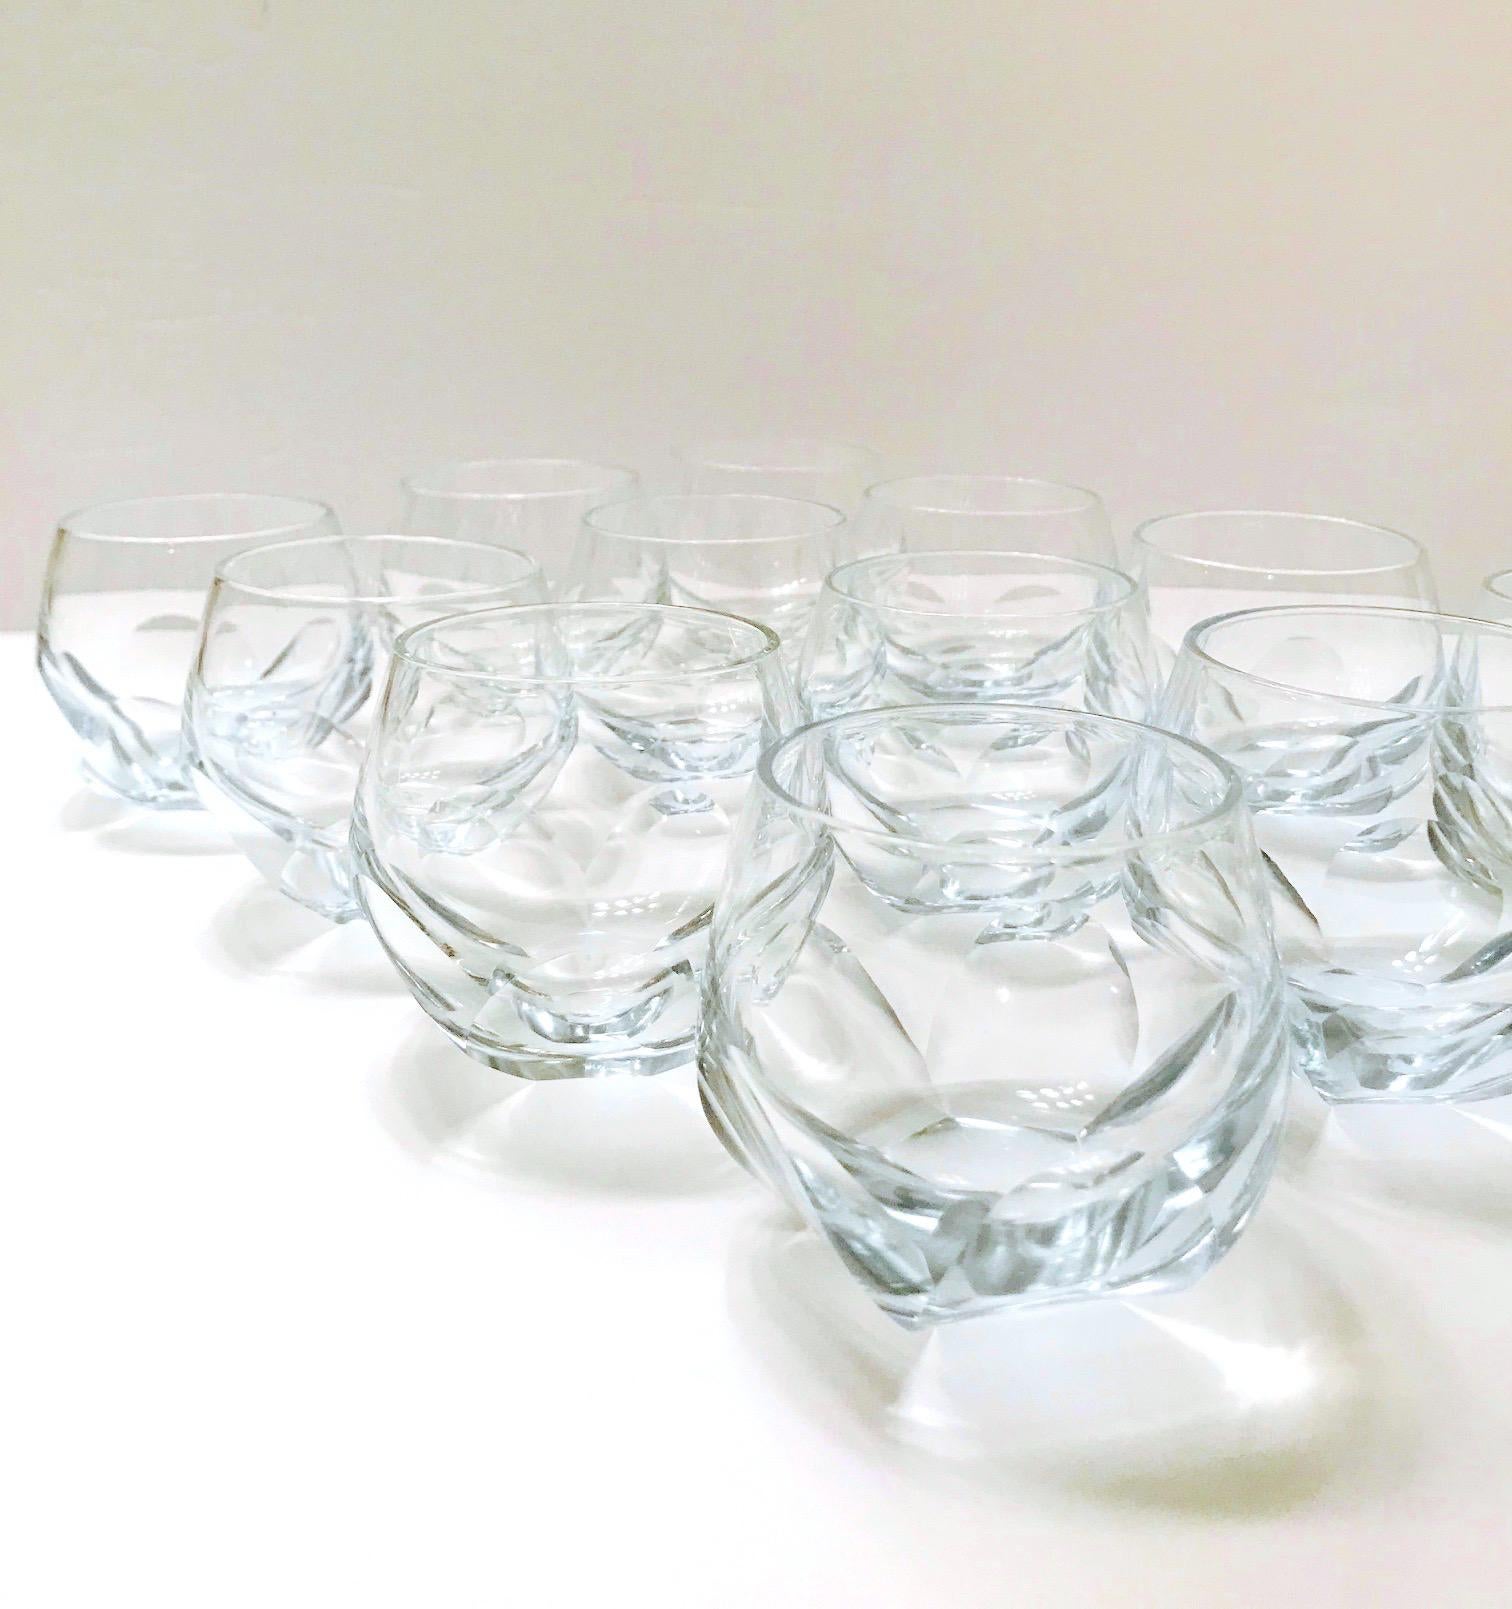 Set of twelve vintage barware glasses with faceted design. The rock glasses have chic round bubble forms with handcut prism bases much like a glass honeycomb. Hand blown glass with a very subtle pale blue cast. Makes a handsome addition to any